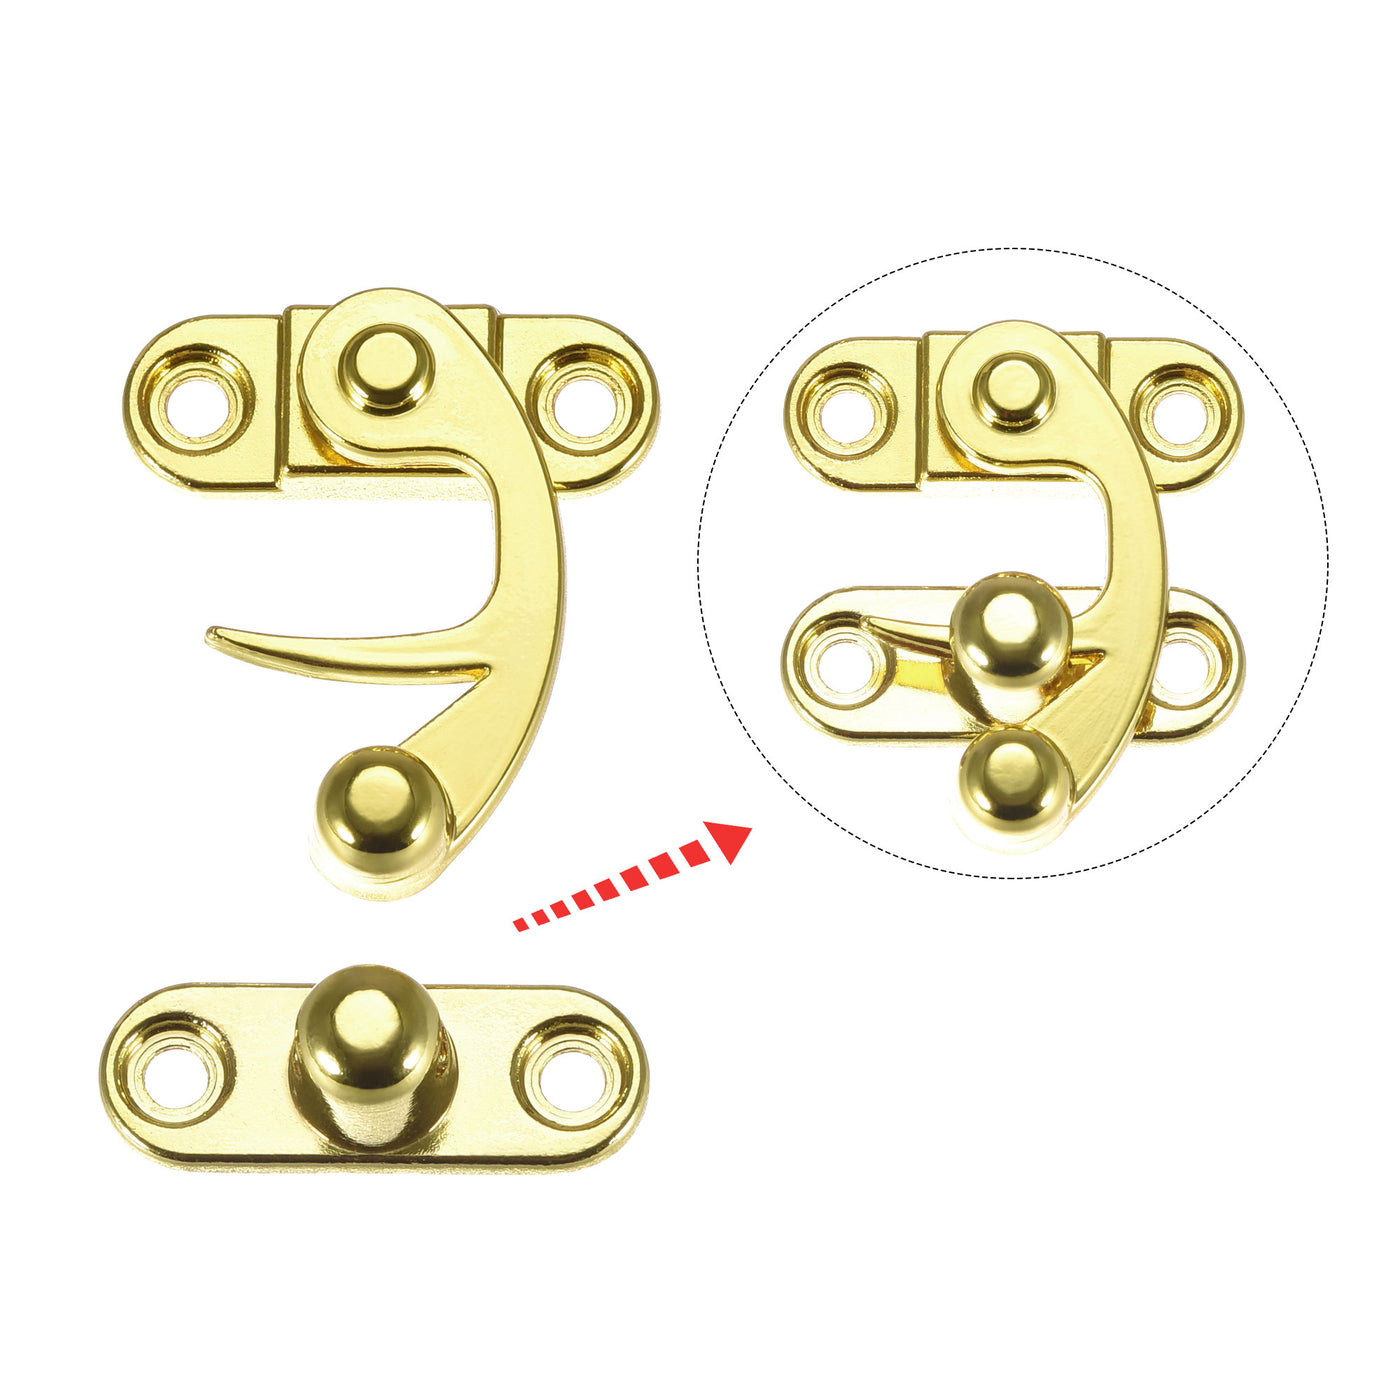 uxcell Uxcell Decorative Antique Right and Left Latch Hook Hasp Swing Arm Latch Gold Tone 5 Set